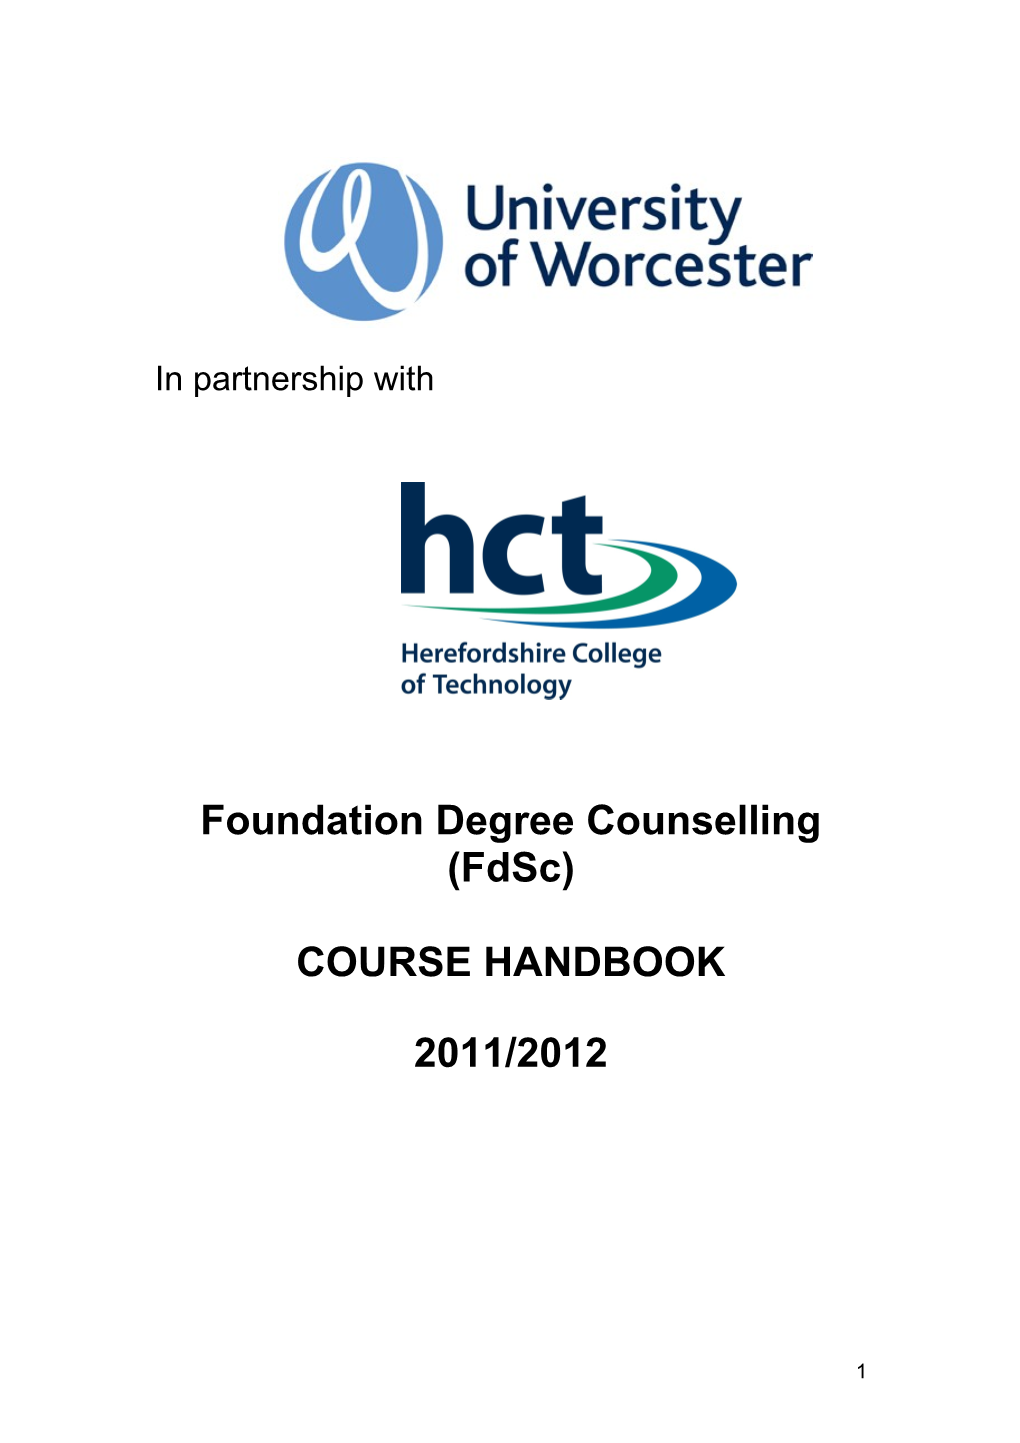 Proposed Template for Course Handbooks